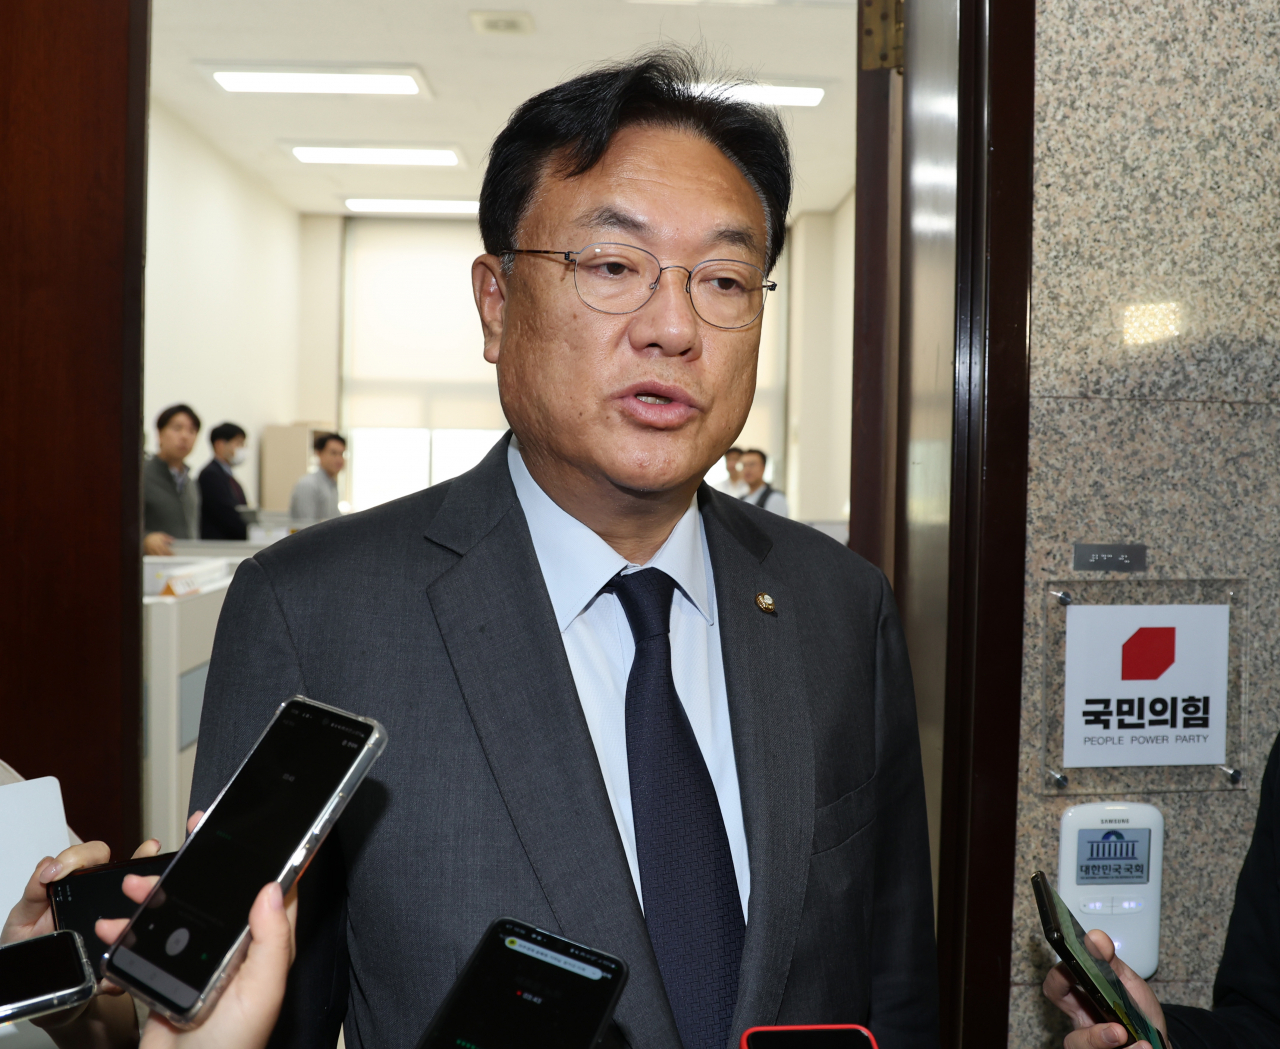 Rep. Chung Jin-suk, leader of the ruling People Power Party, speaks to the press at the National Assembly on Monday. (Yonhap)